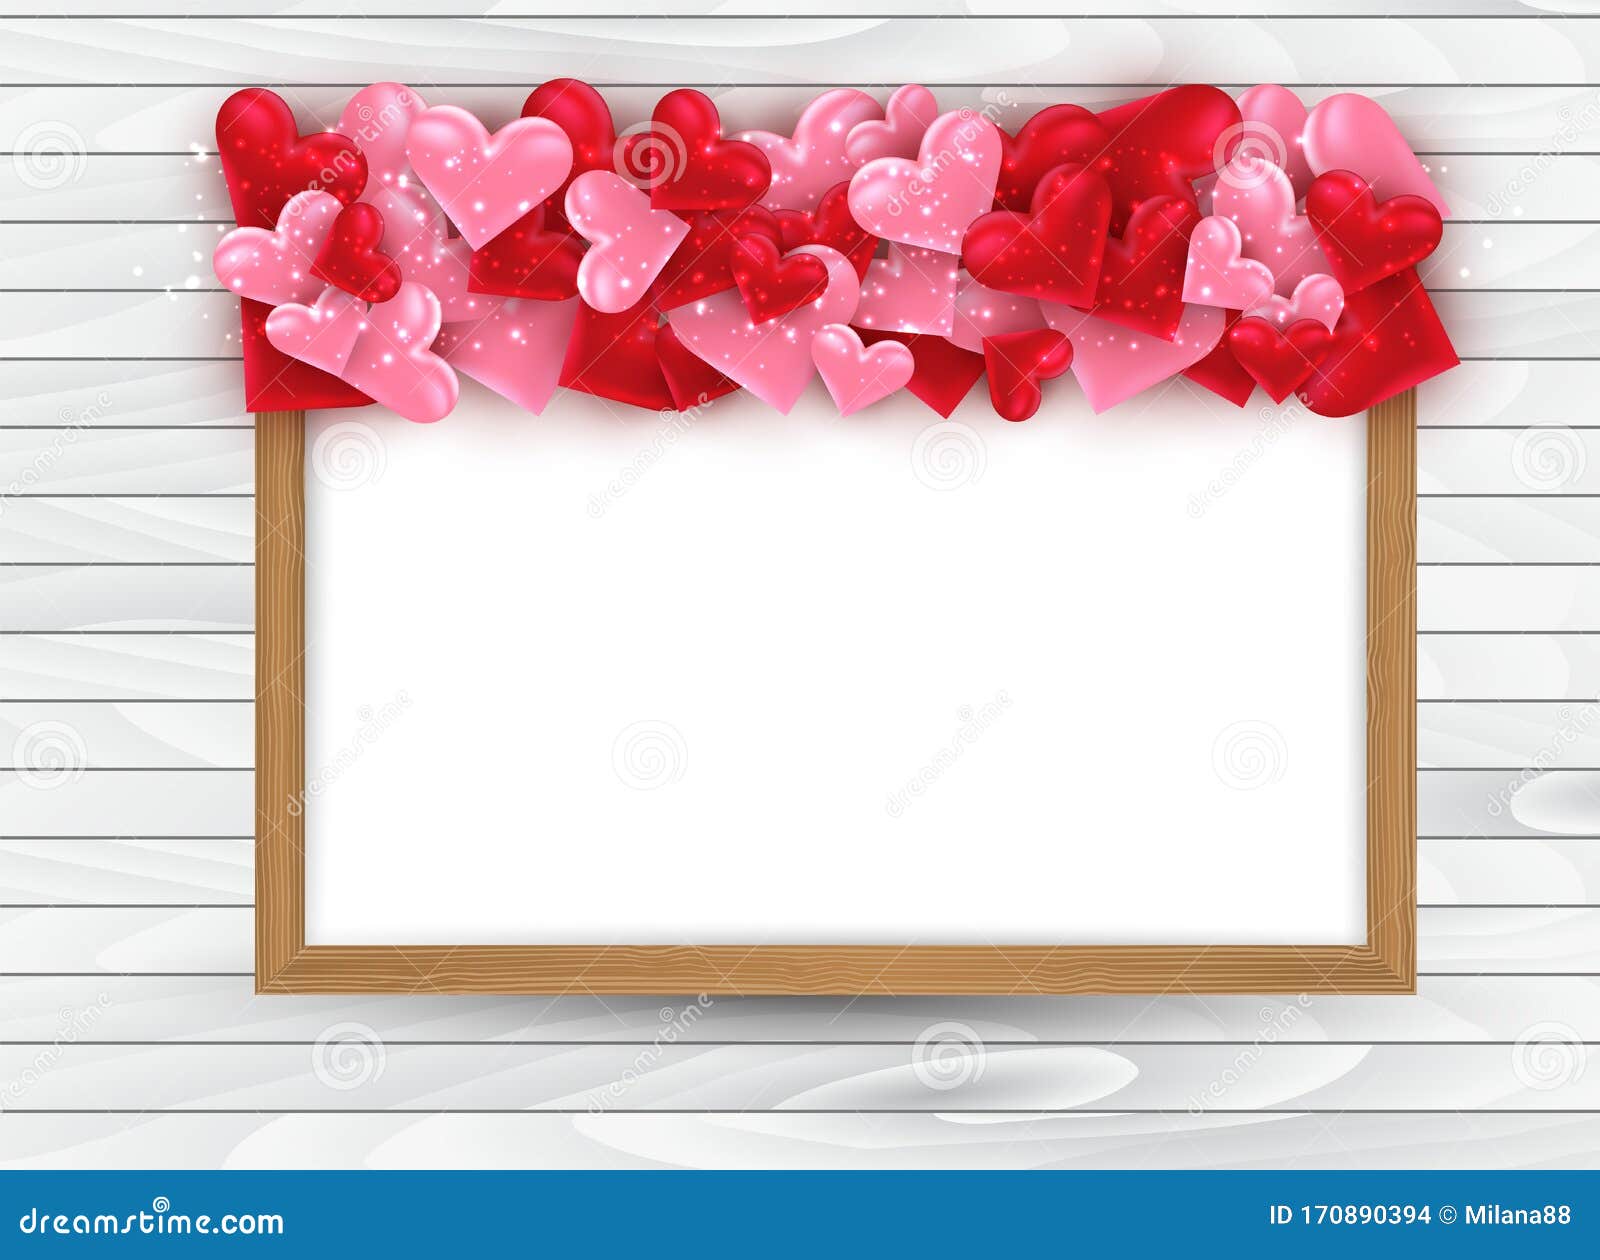 Valentines Day Background with 3d Pink and Red Hearts on Whiteboard in  Wooden Frame. Love Background Design Concept Stock Vector - Illustration of  holiday, design: 170890394